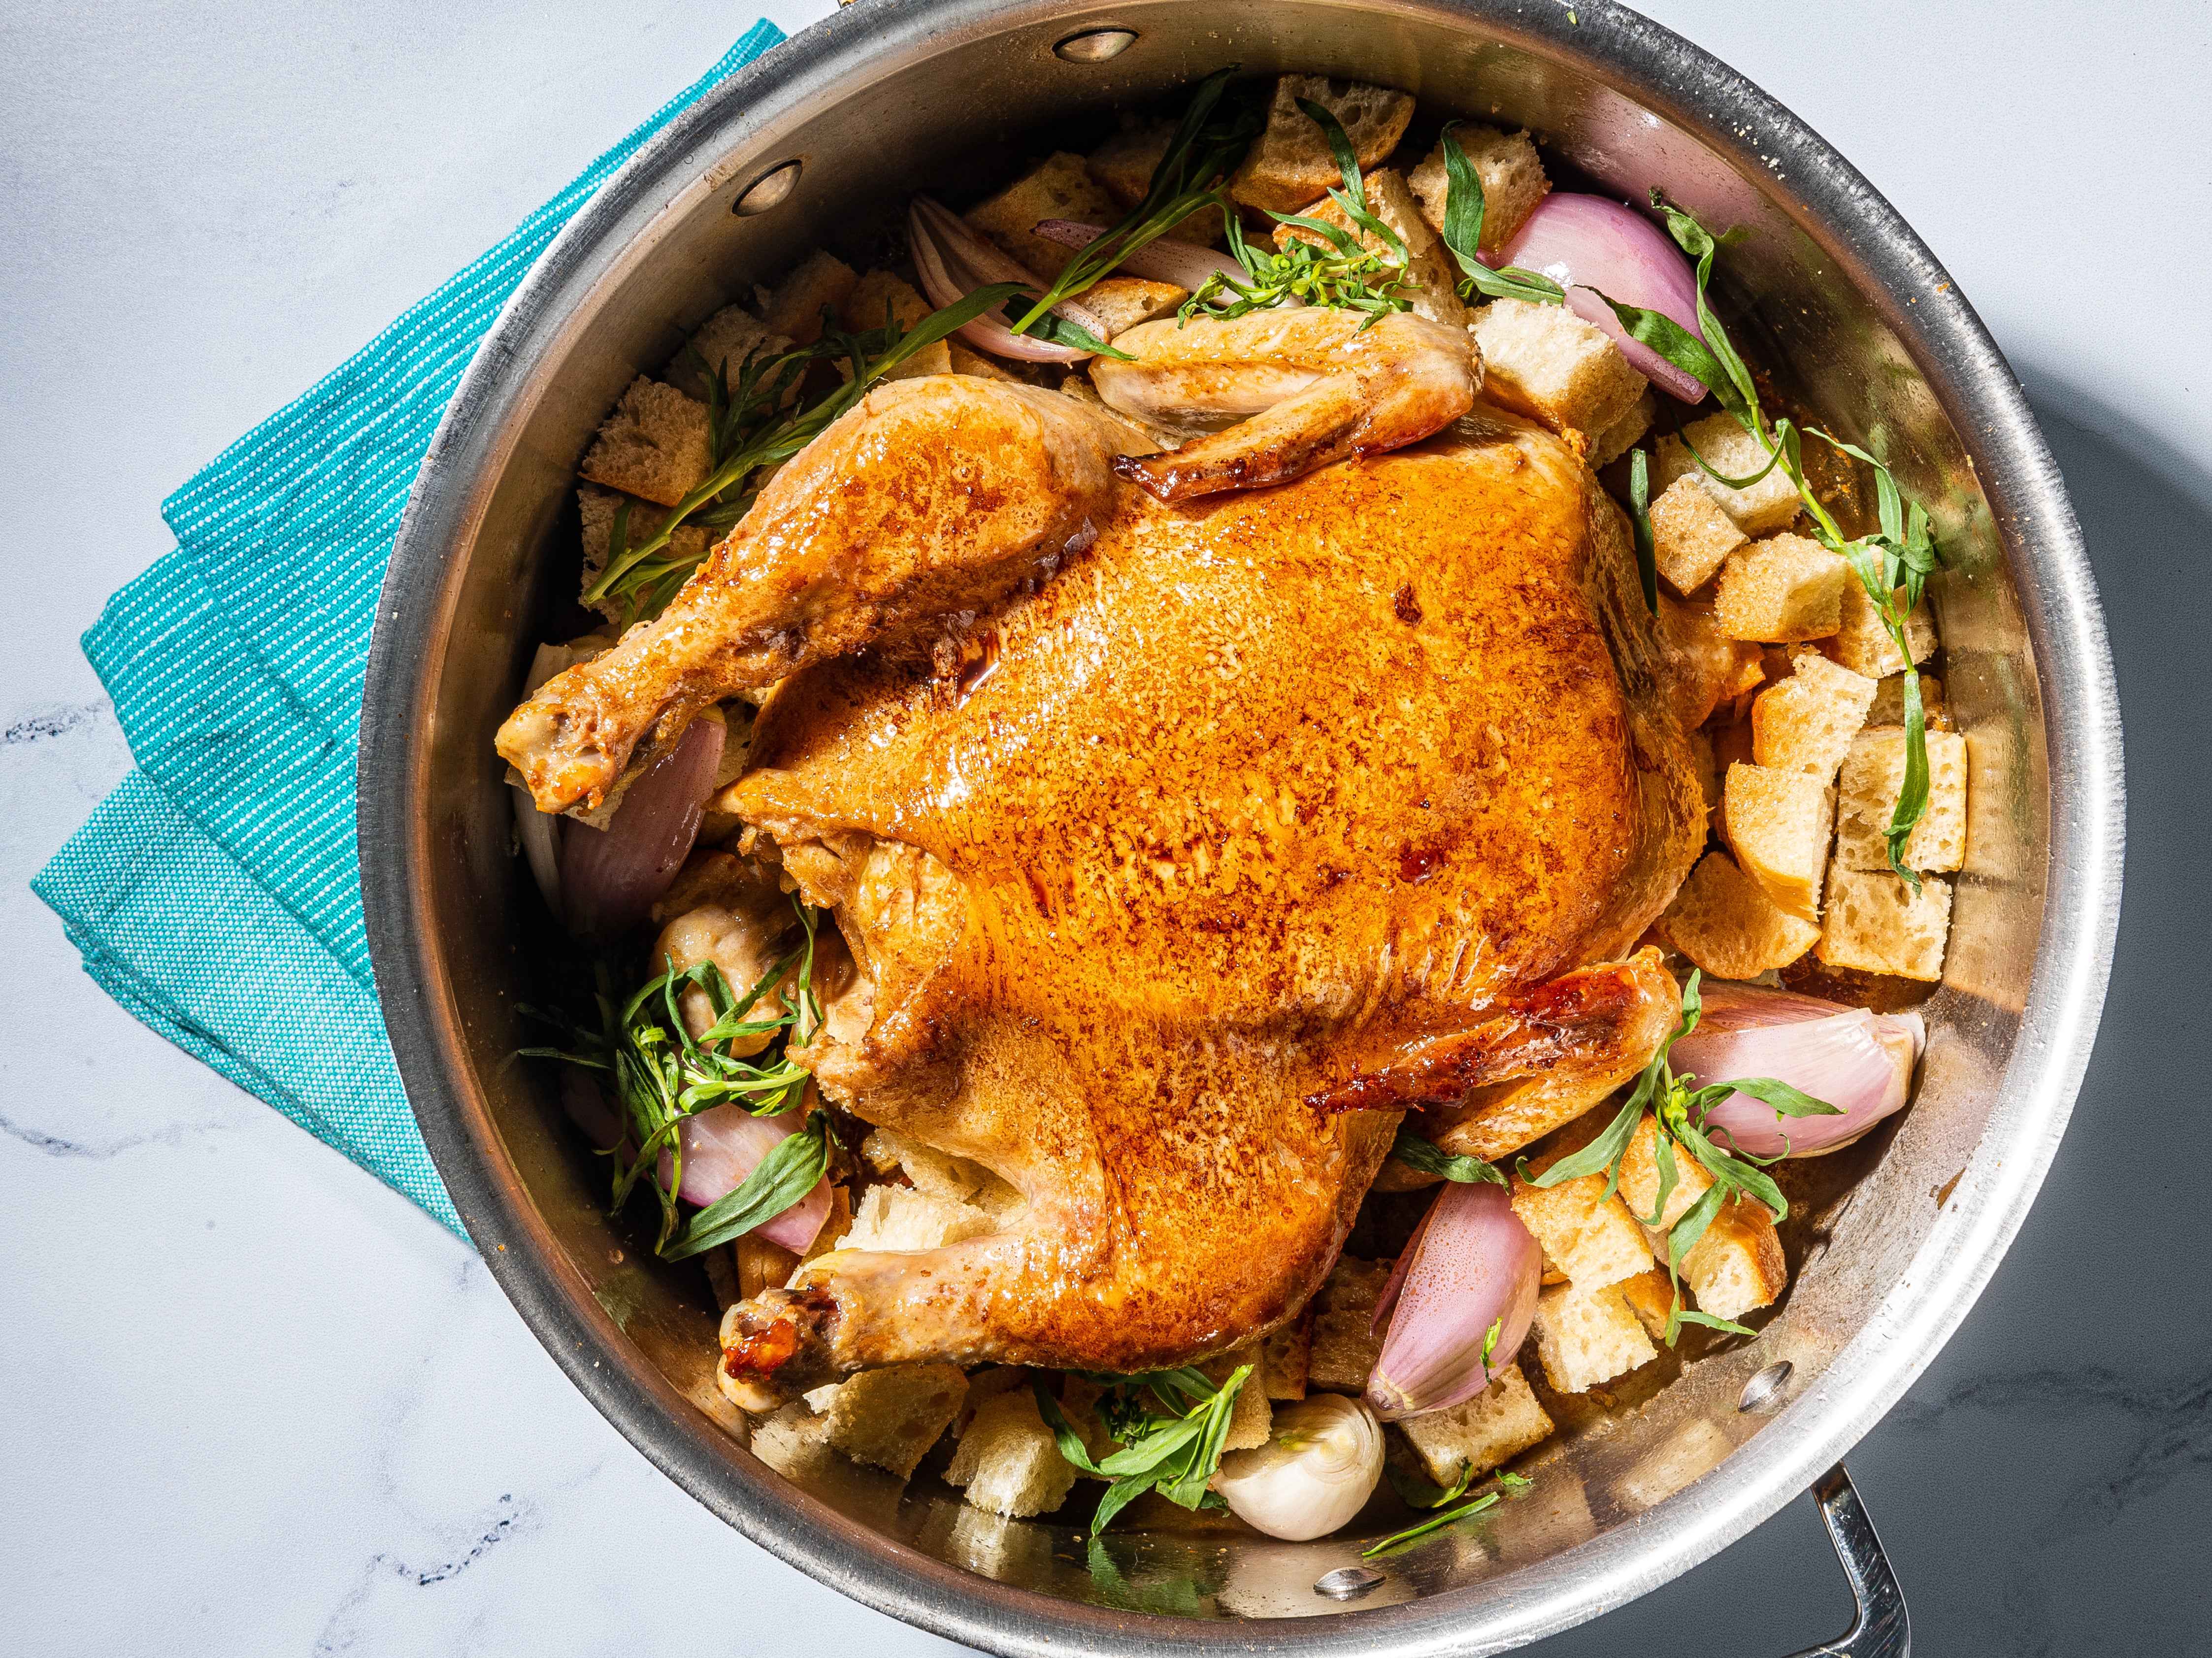 A good roasted chicken is a simple, elegant thing